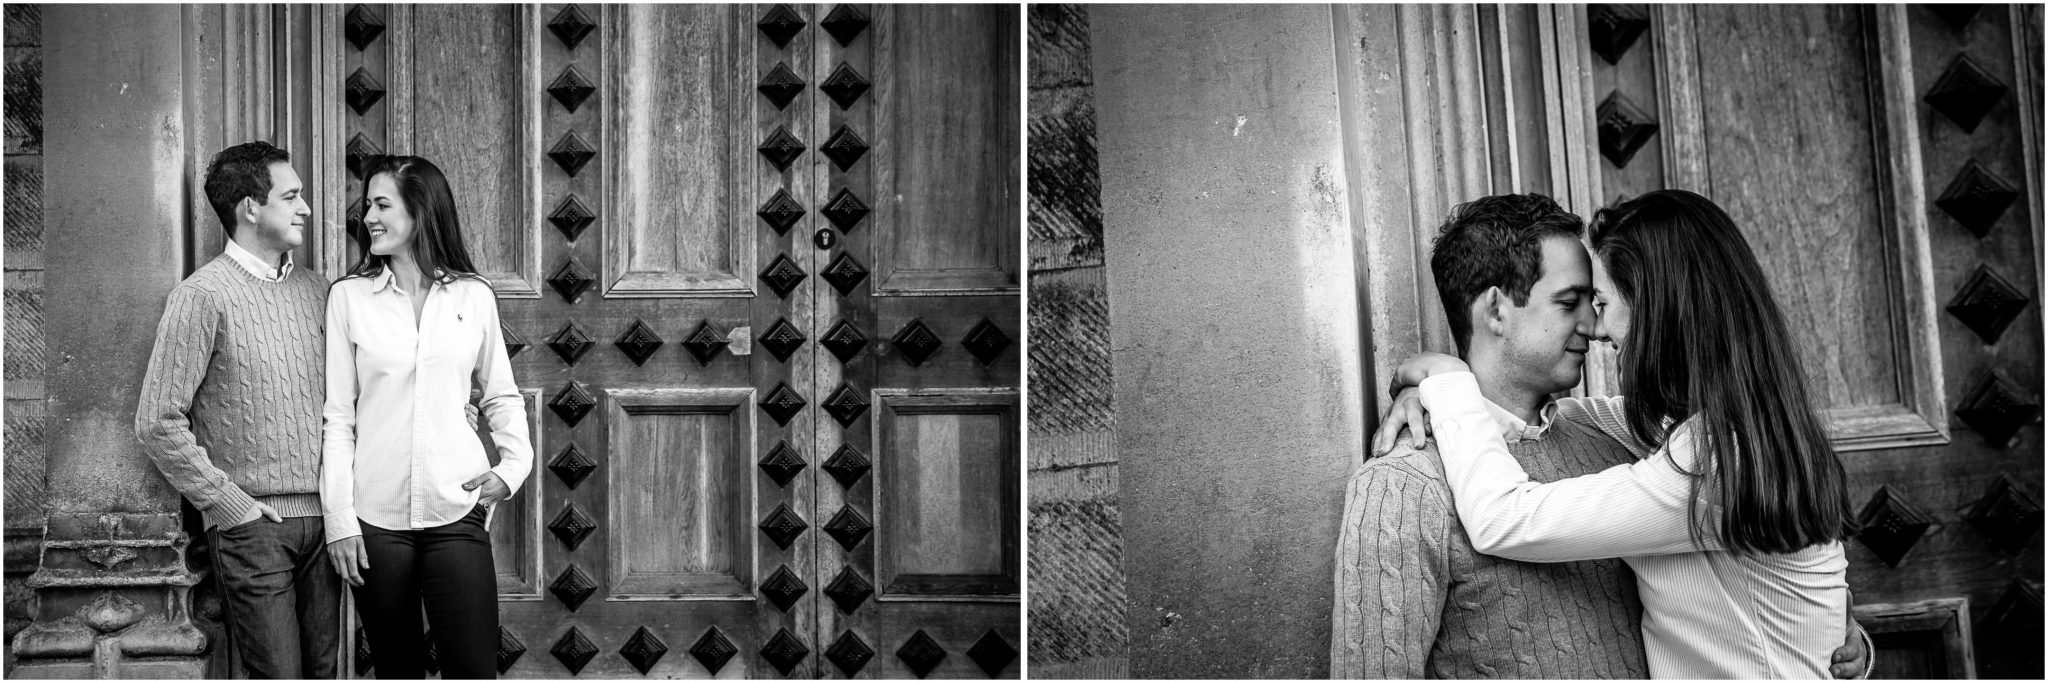 Black and white images of bride and groom on pre-wedding photoshoot